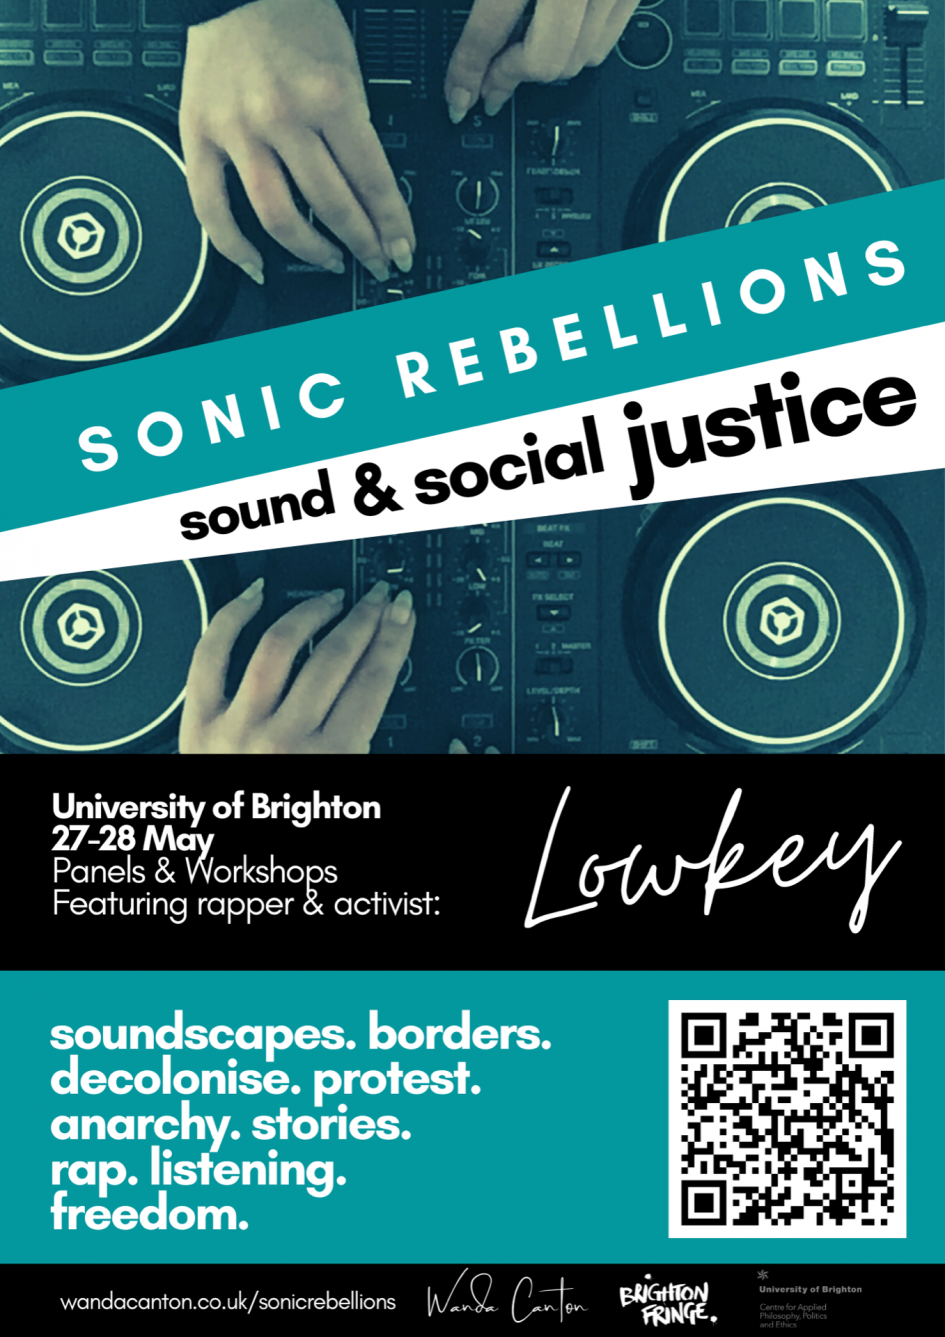 Image is a poster publicising the event. It has a background image of hands on a dj deck and words publicising the event as in description